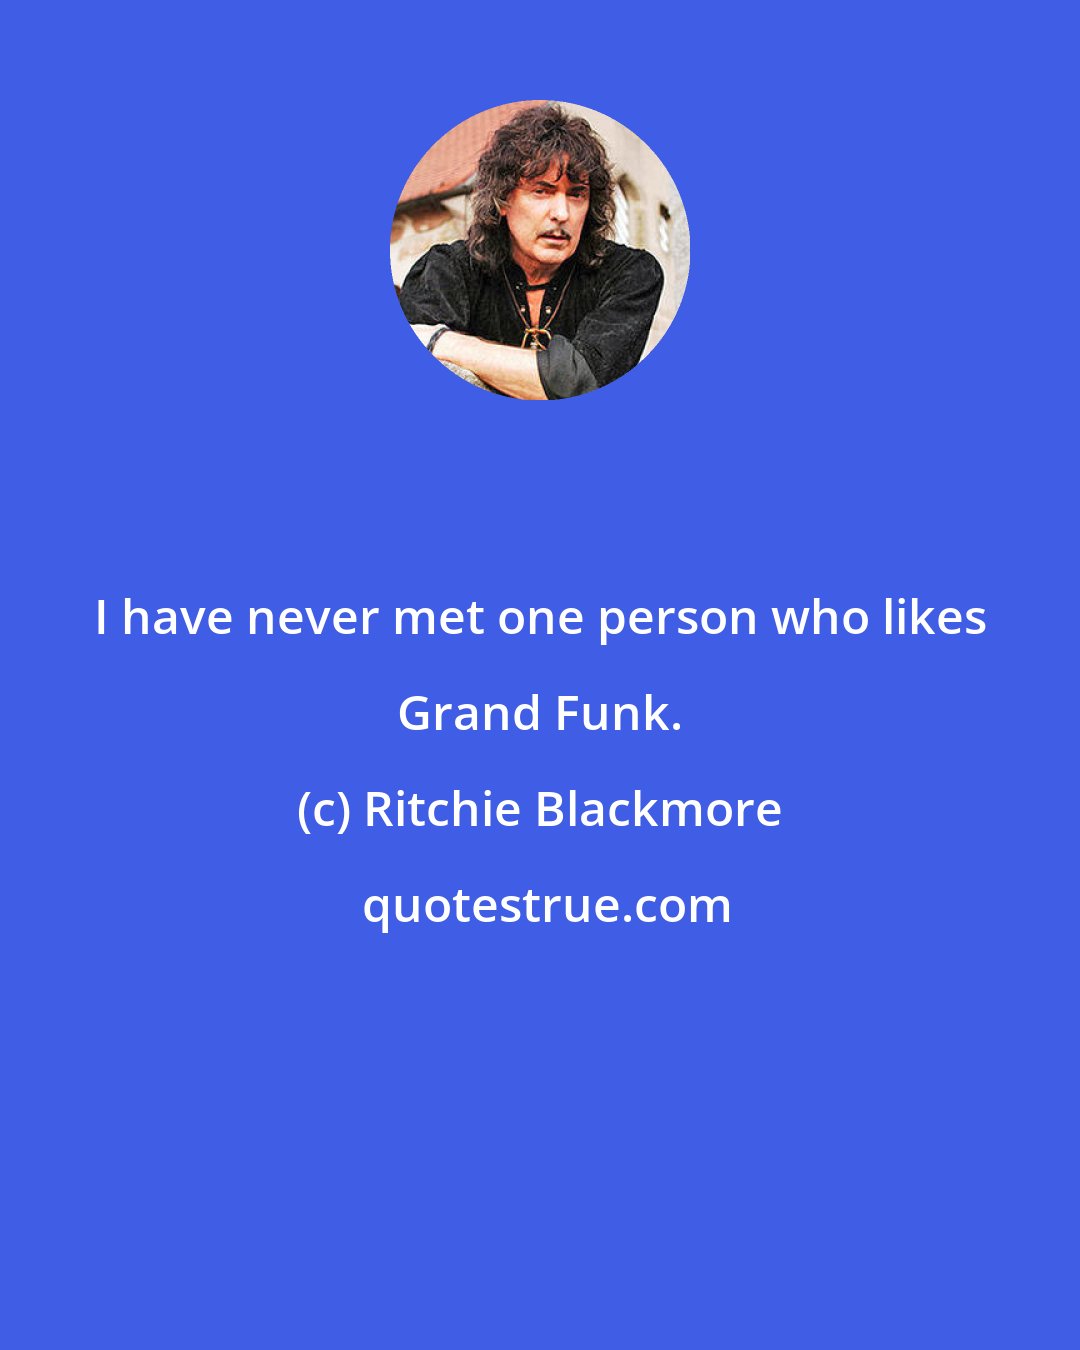 Ritchie Blackmore: I have never met one person who likes Grand Funk.